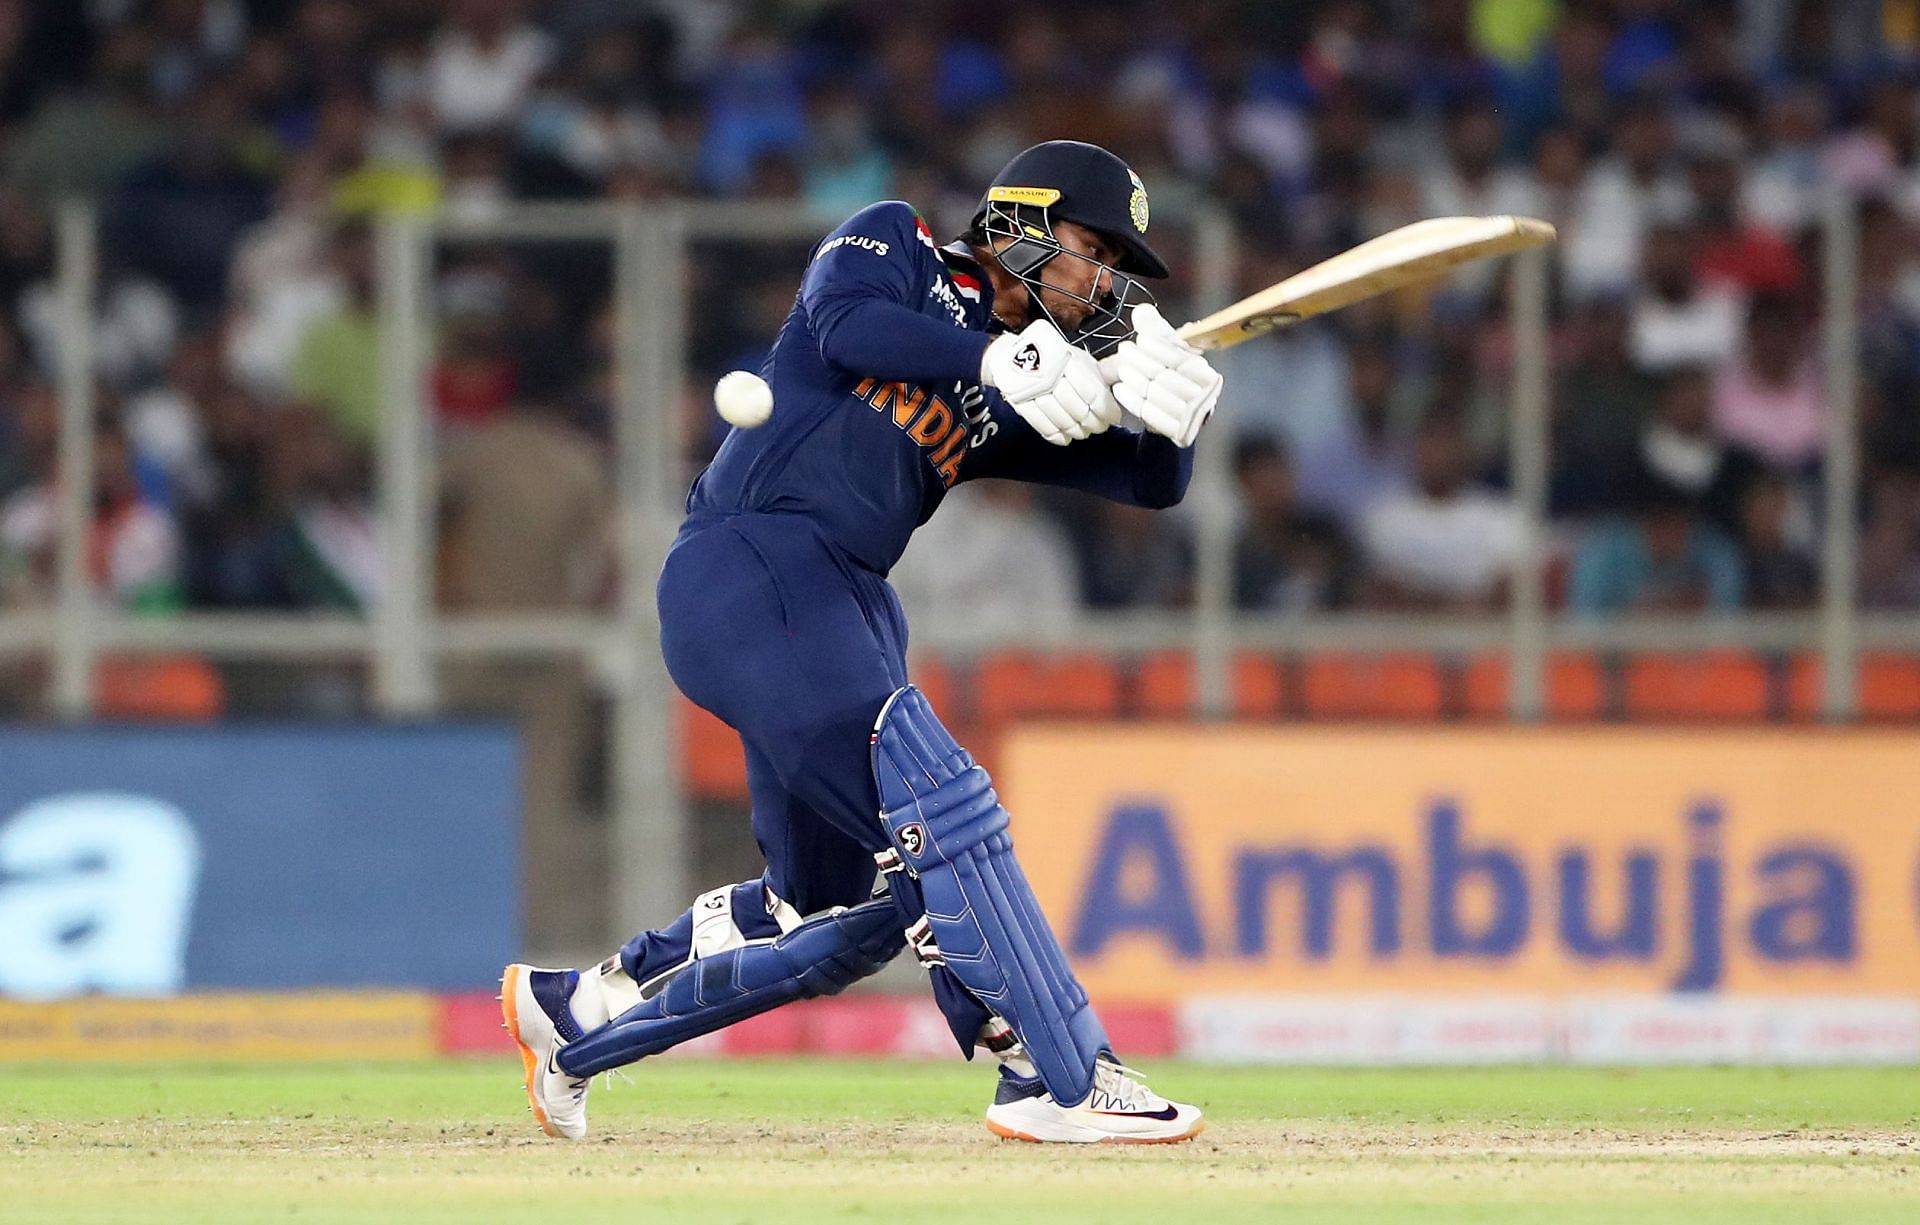 Ishan Kishan is known for playing the aggressive game at the top of the order